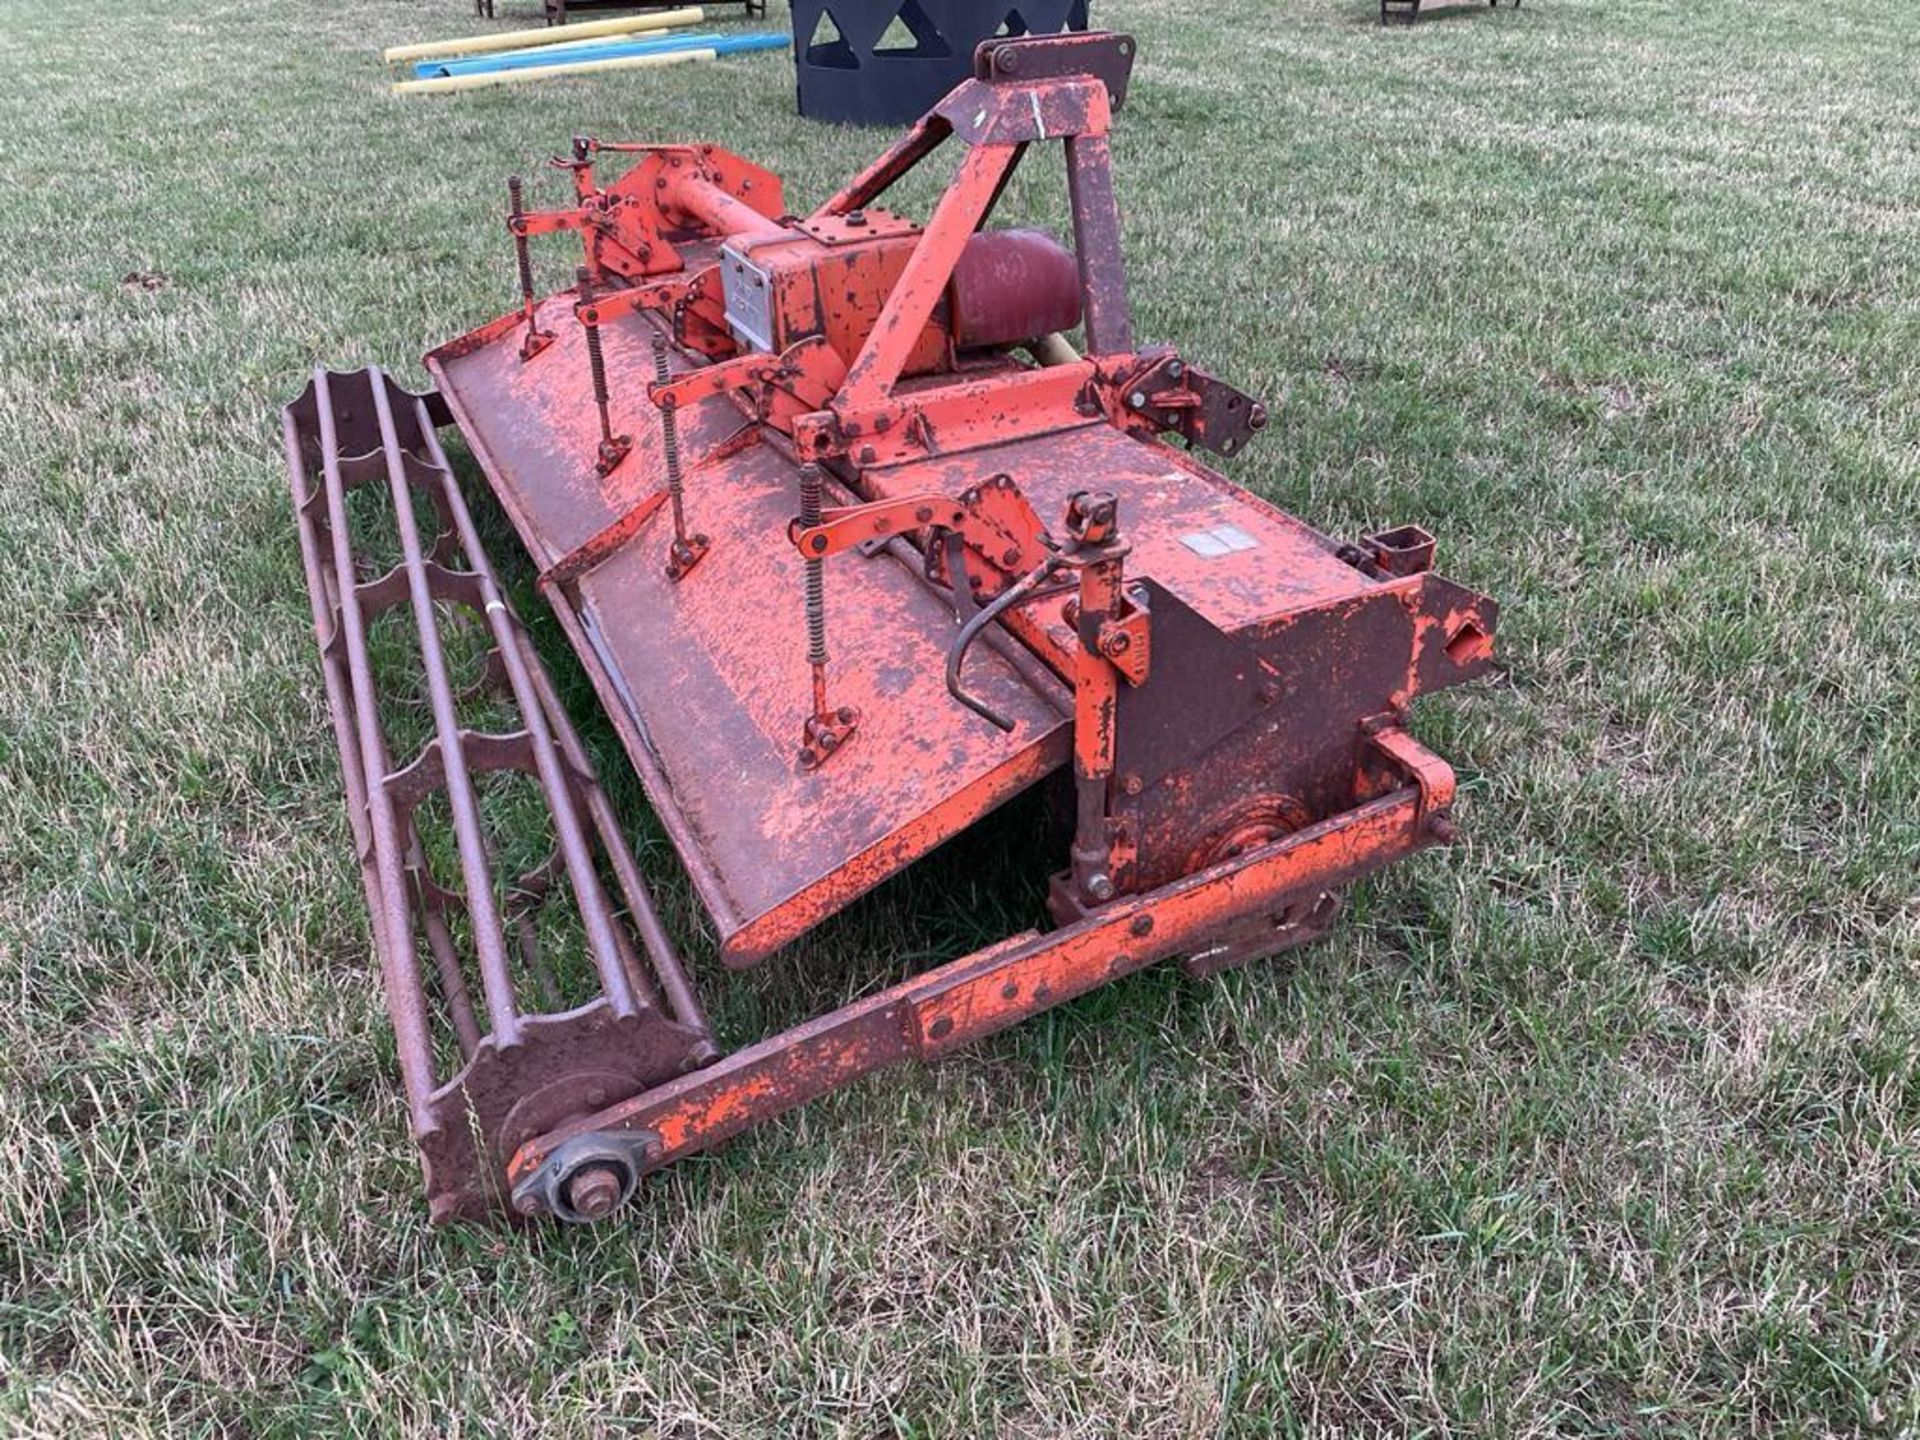 Howard HB100 8' 9" rotavator with rear crumbler, PTO driven, linkage mounted. Serial No: 802A4581 ​​ - Image 9 of 10